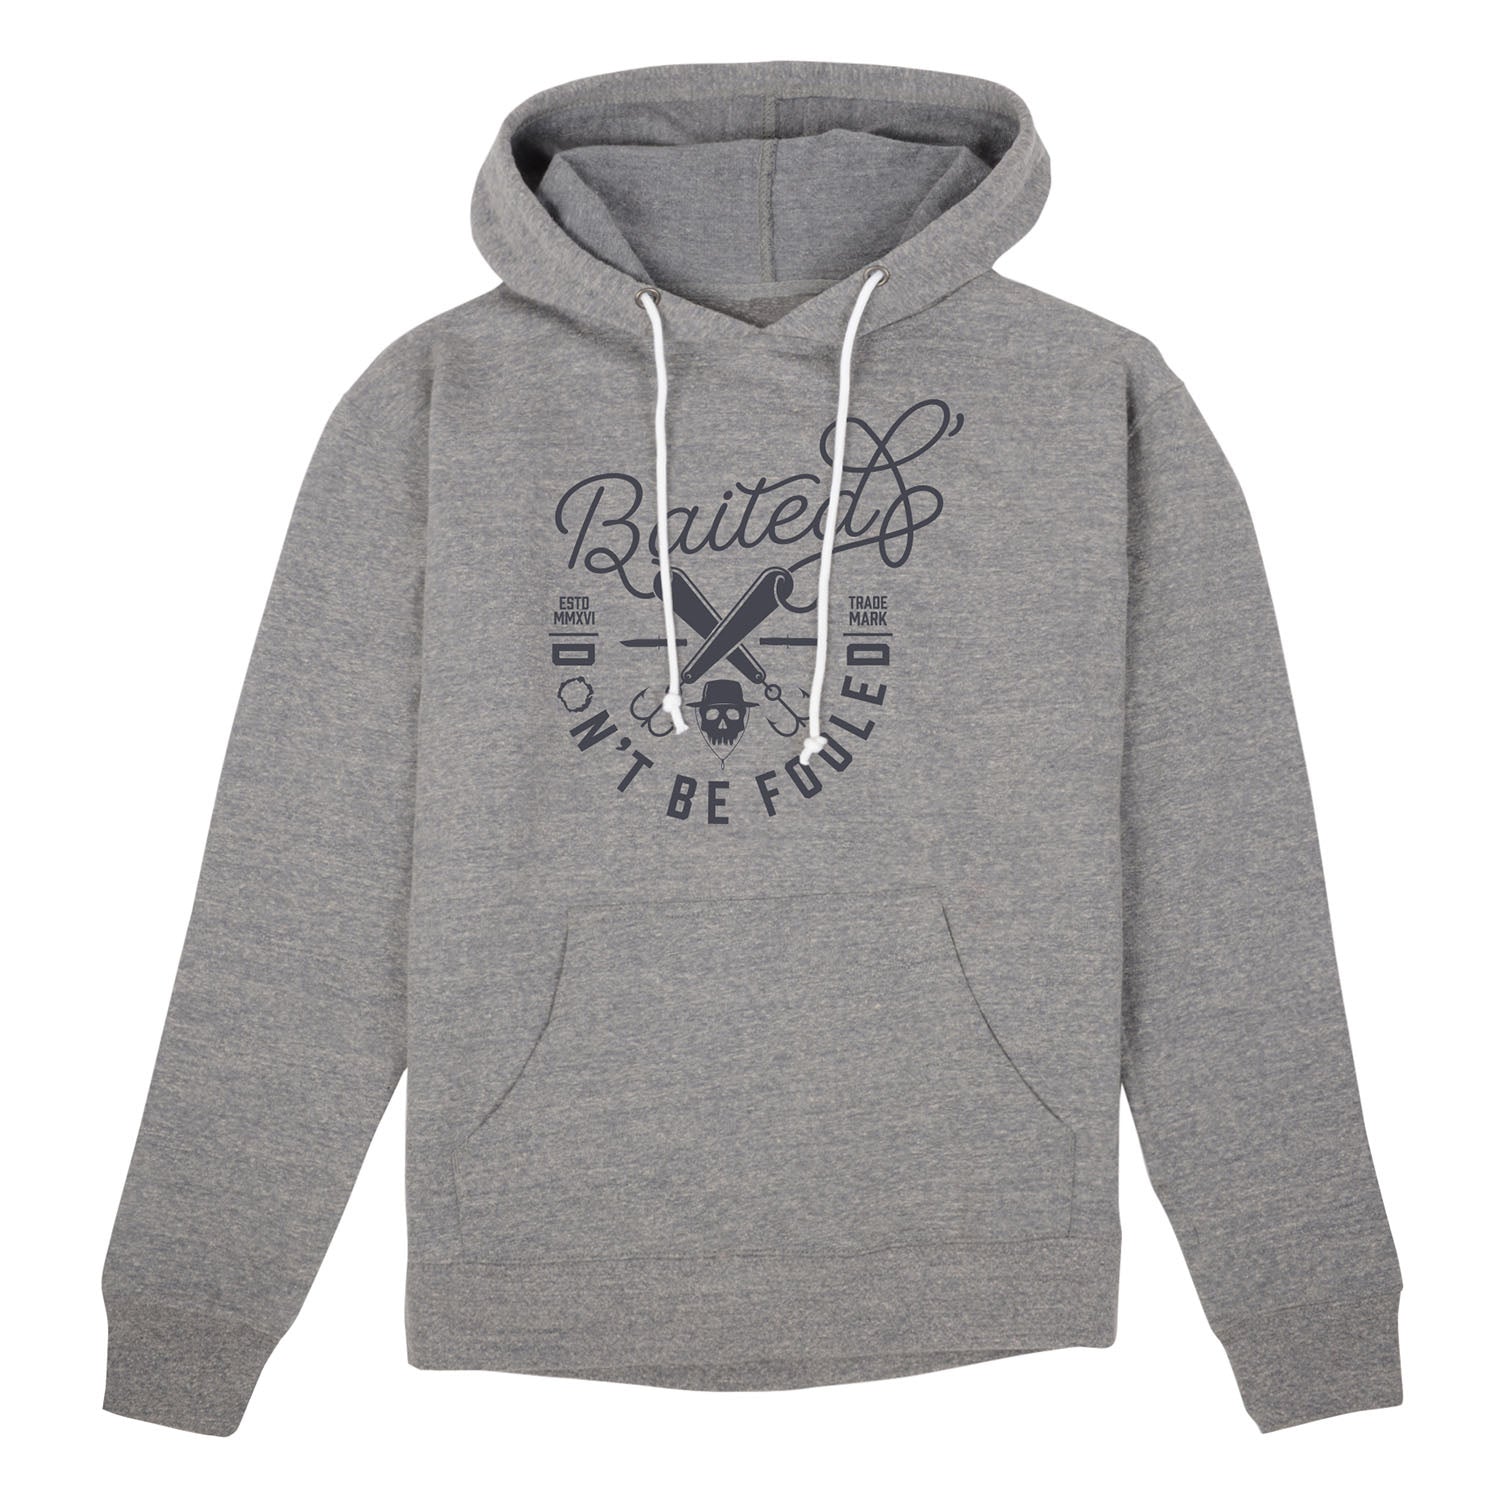 Call of Duty Grey Baited Hoodie - Front View